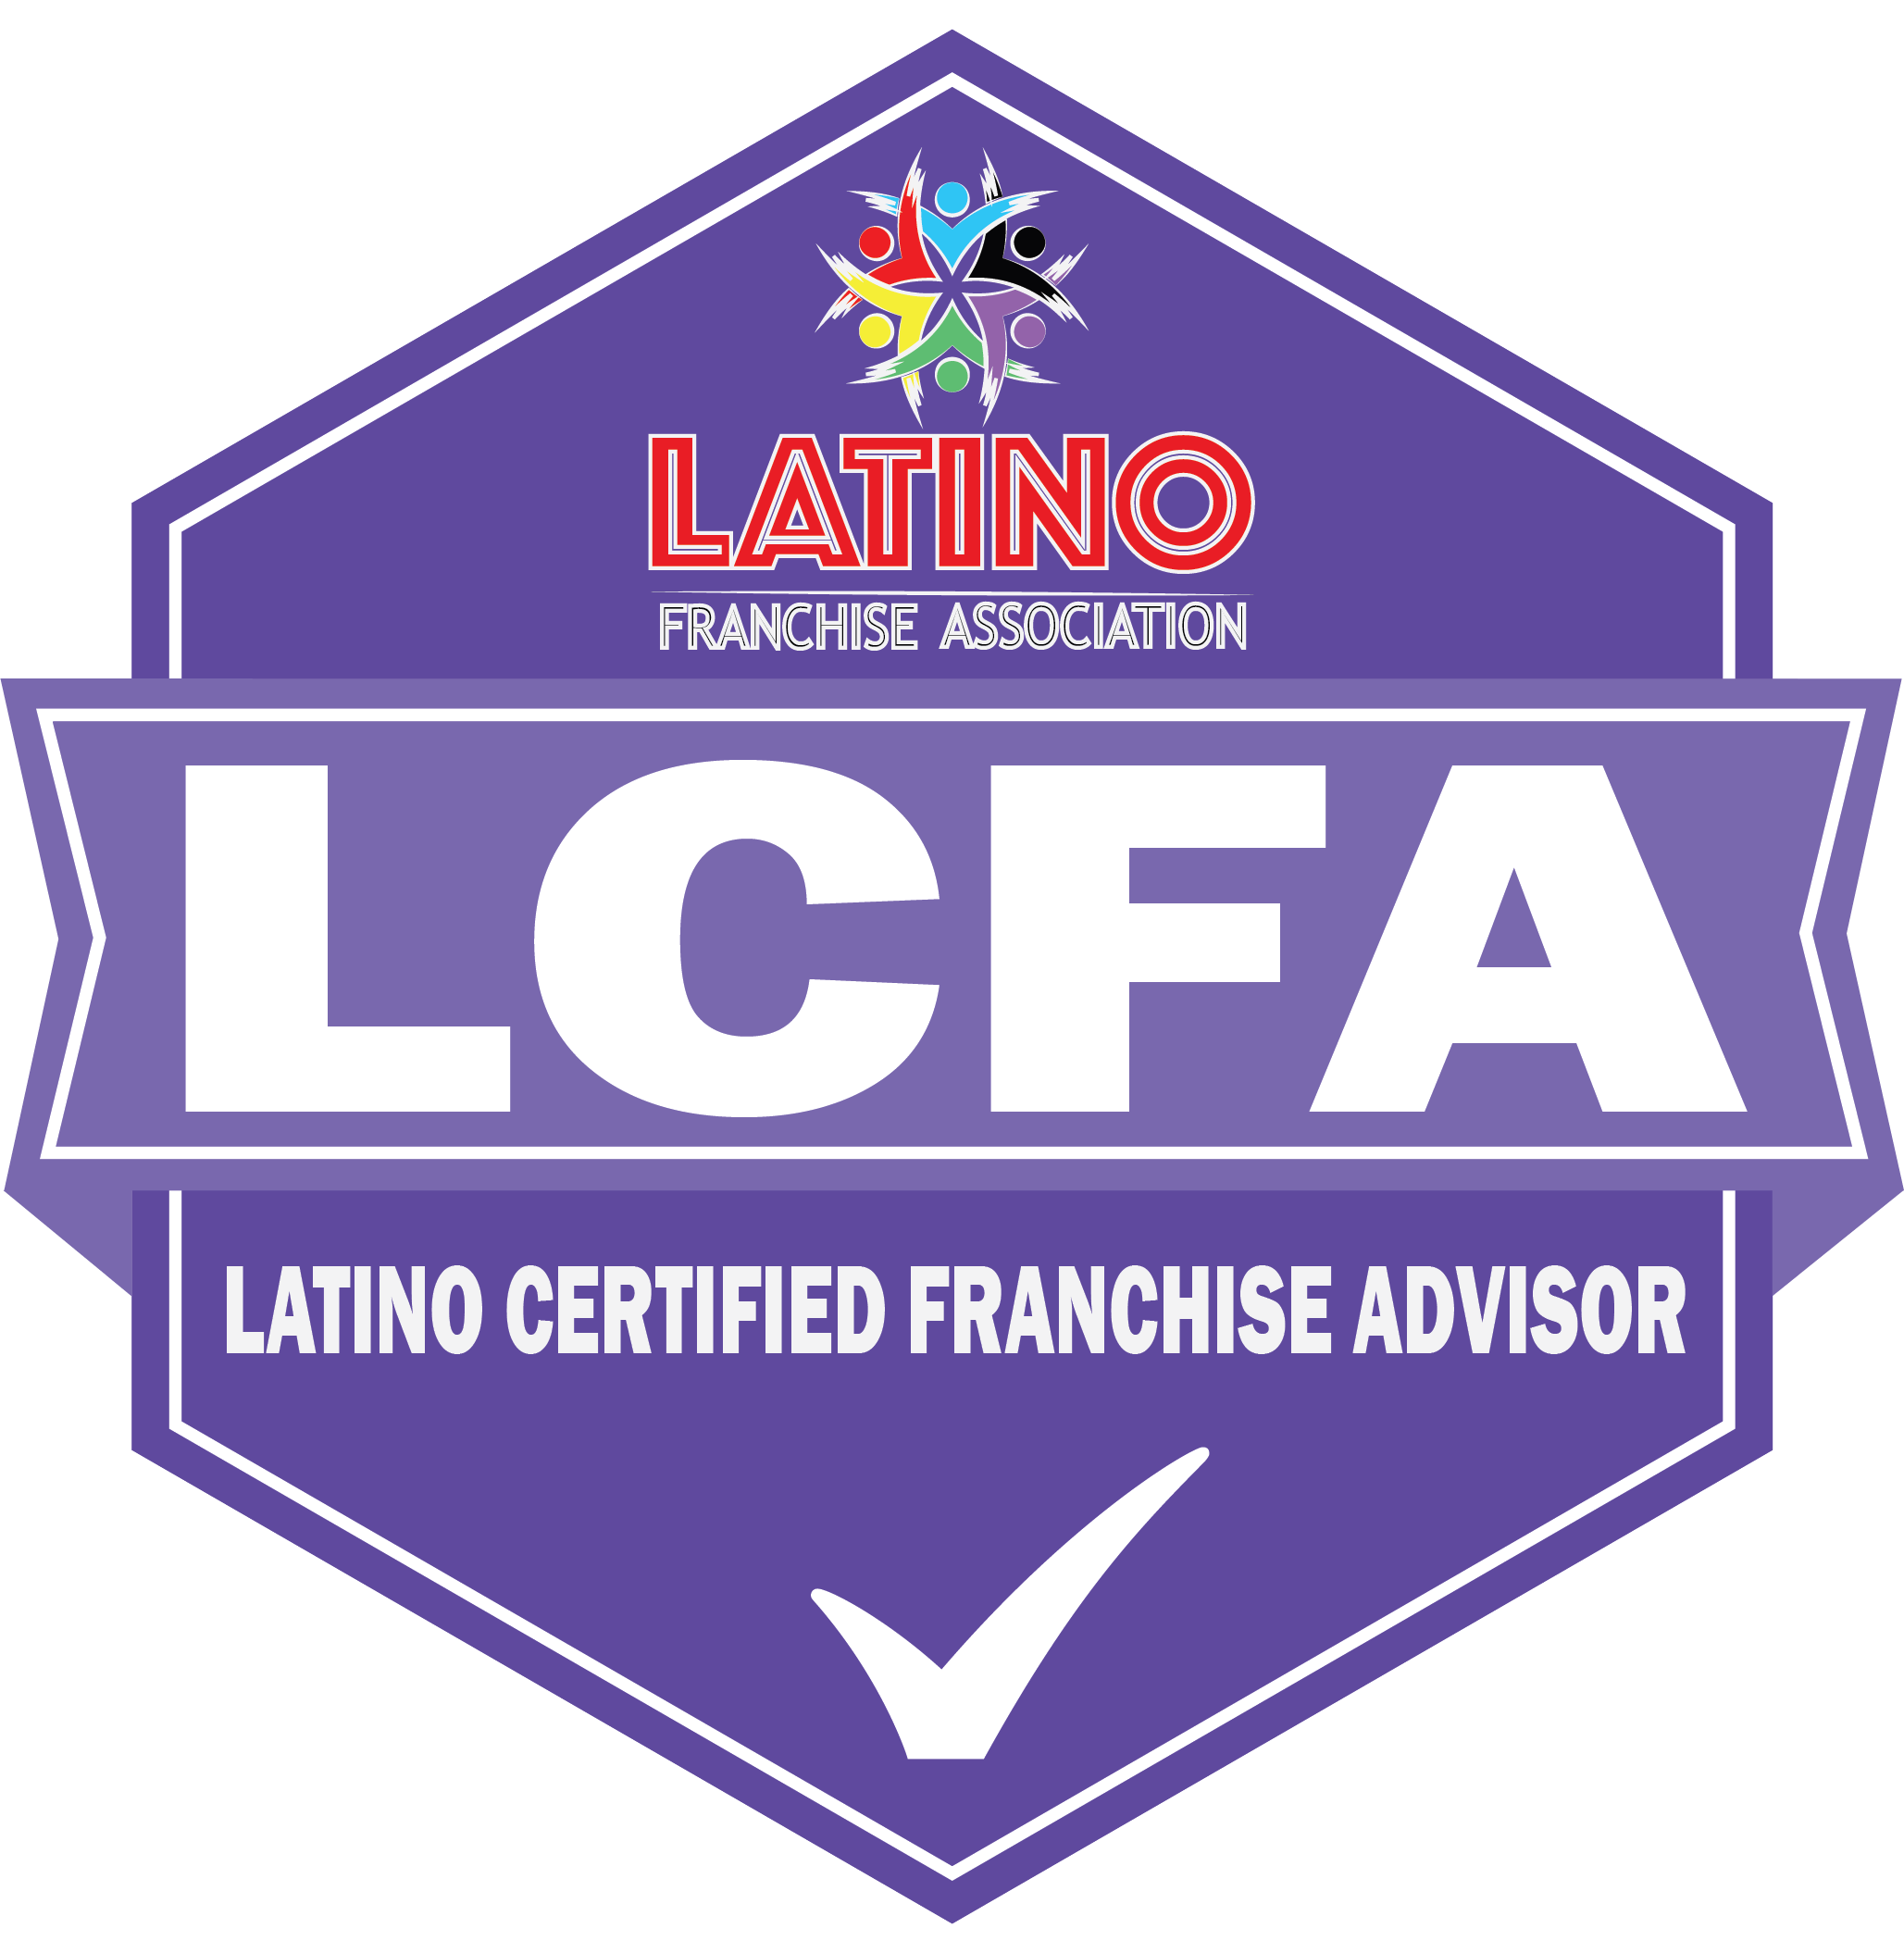 NATIONAL FRANCHISE ALLIANCE AND LATINO FRANCHISE ASSOCIATION JOIN FORCES TO CREATE THE BEST CERTIFIED FRANCHISE ADVISOR COURSE IN THE INDUSTRY